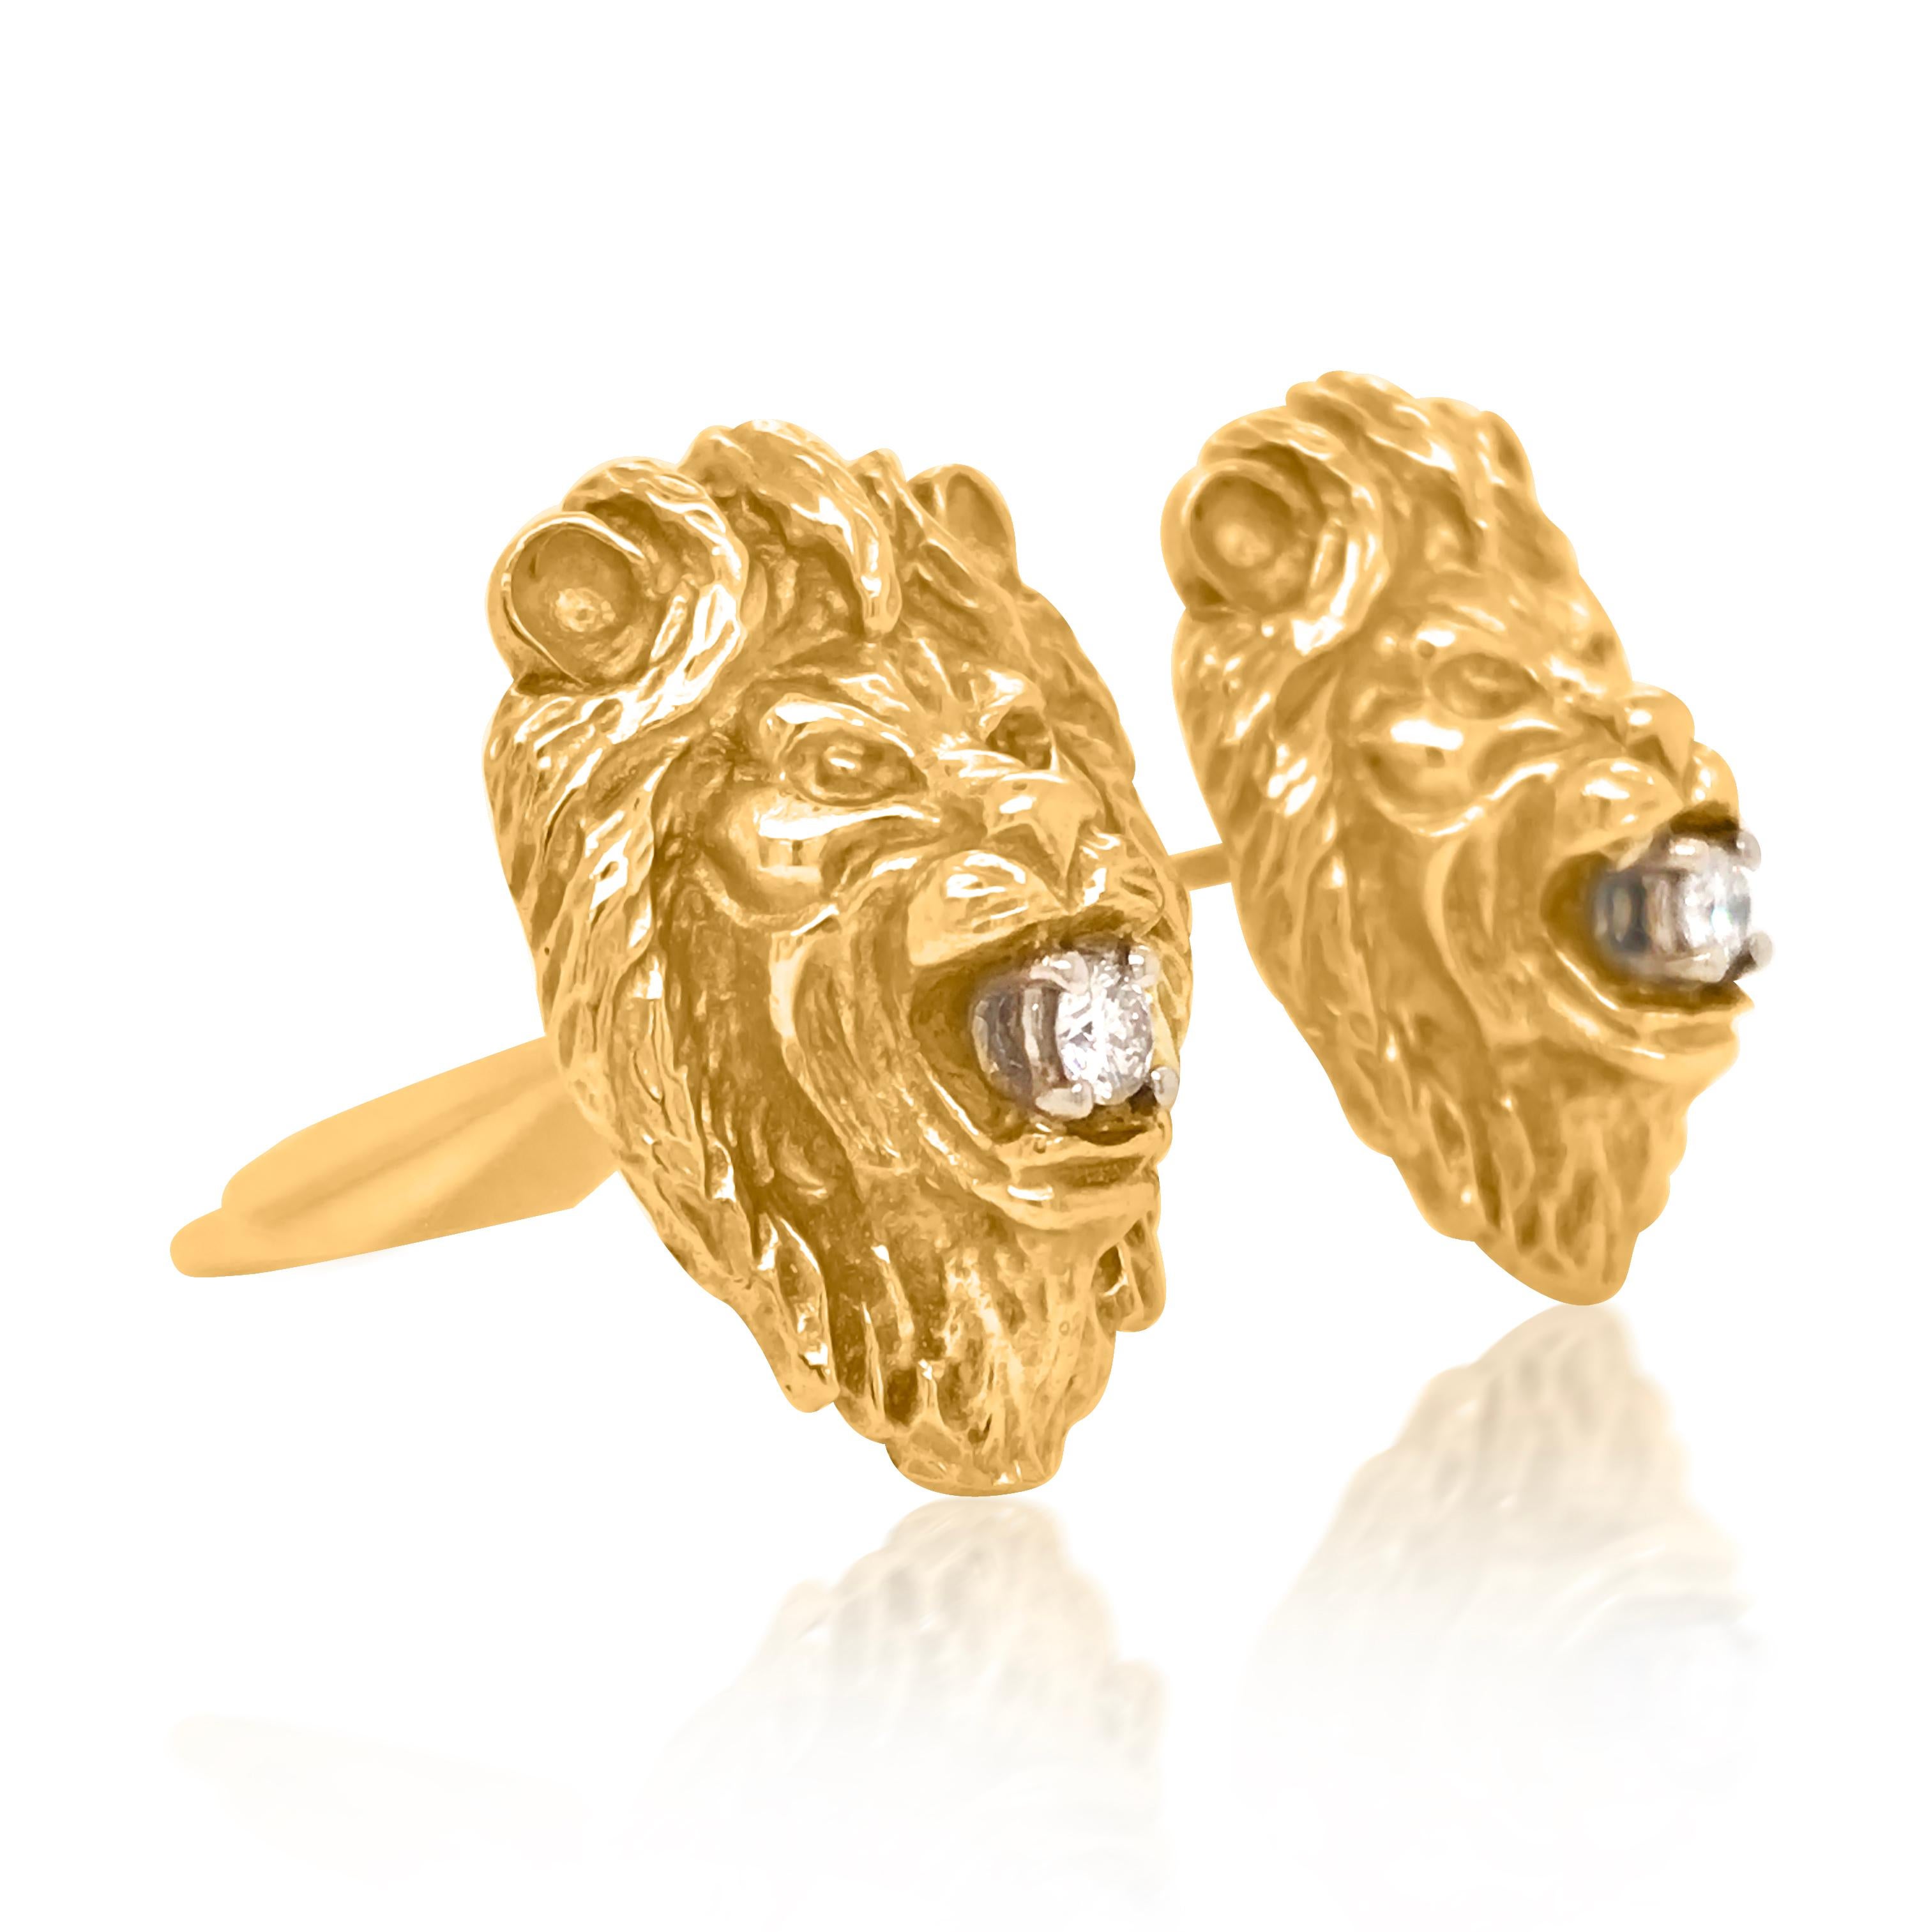 These magnificent lion head cuff-links are crafted in solid 18K yellow gold and with links in 14K yellow gold, weigh 20.54 grams and measure 23x17mm. These distinguished cufflinks are designed as a lion head with the vividly carved pattern as hair